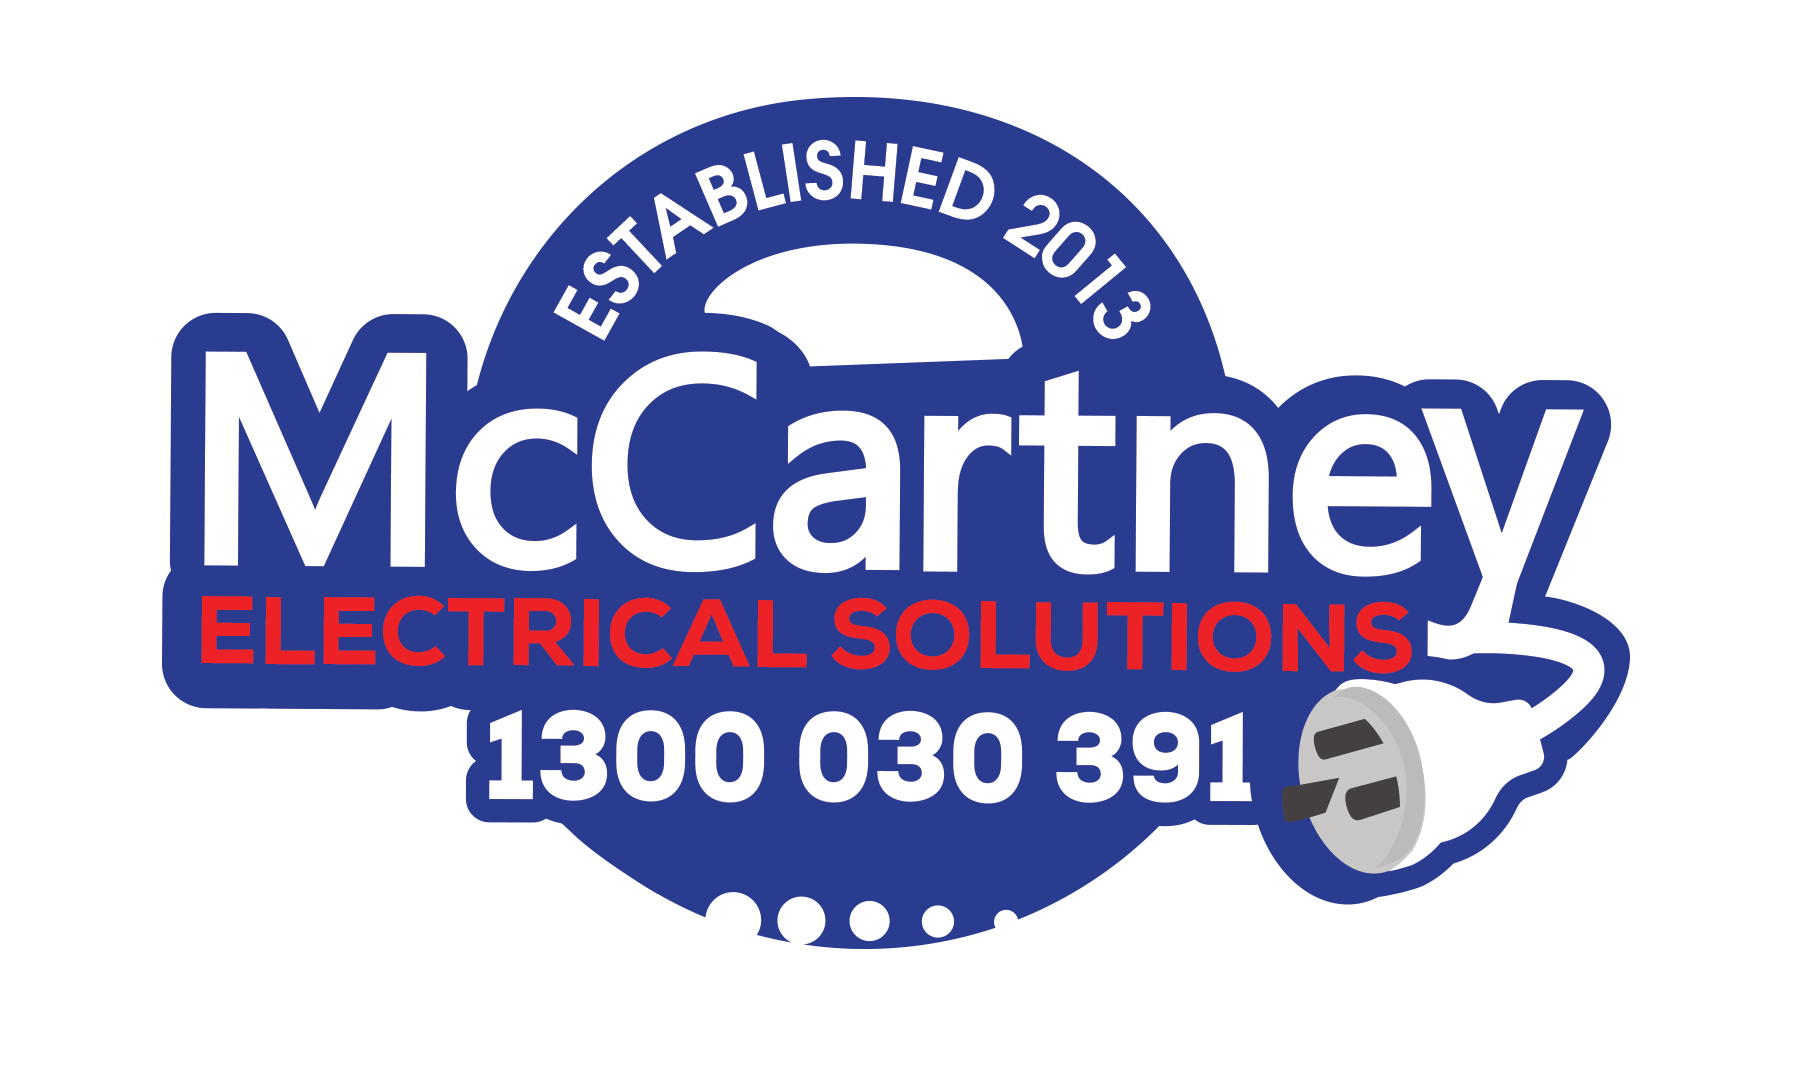 McCartney Electrical Solutions